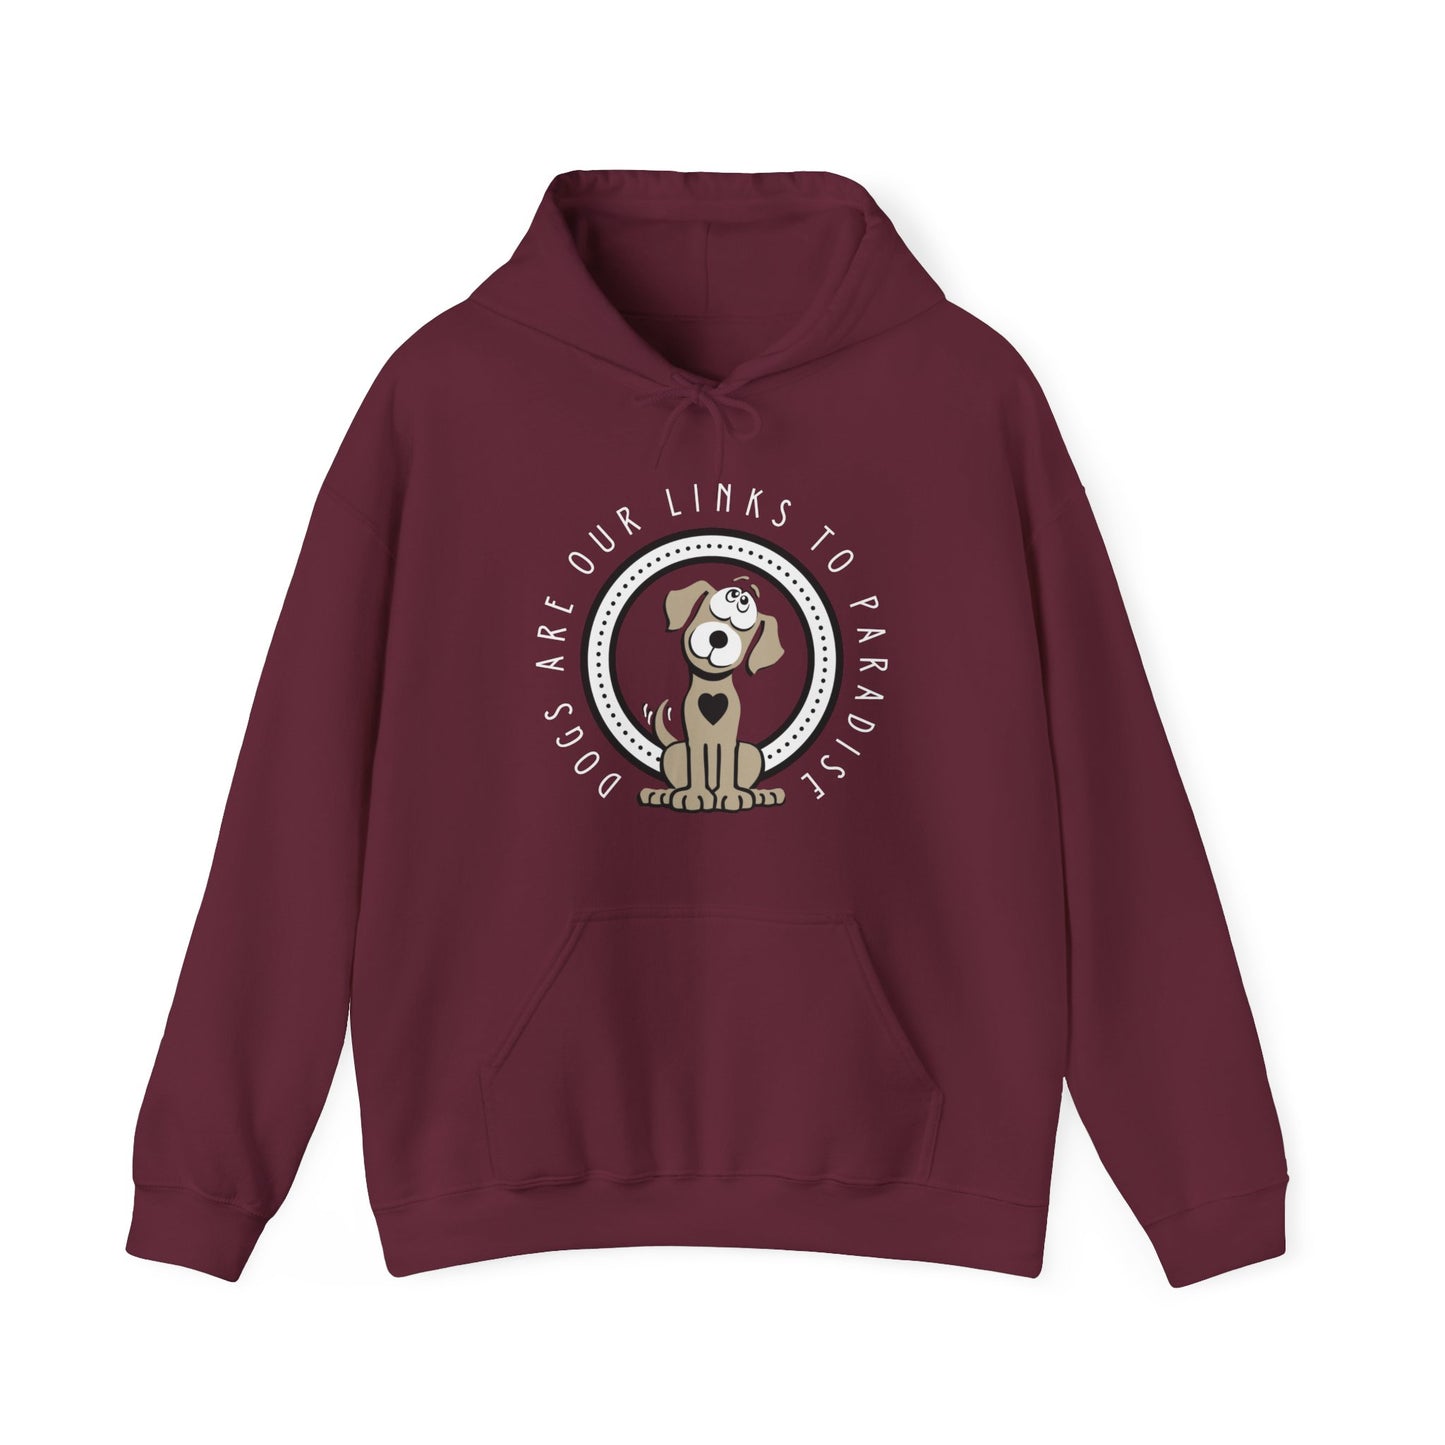  Against a white backdrop, a maroon Dogs Pure Love unisex hoodie proudly displays the 'Dogs Are Paradise' print.